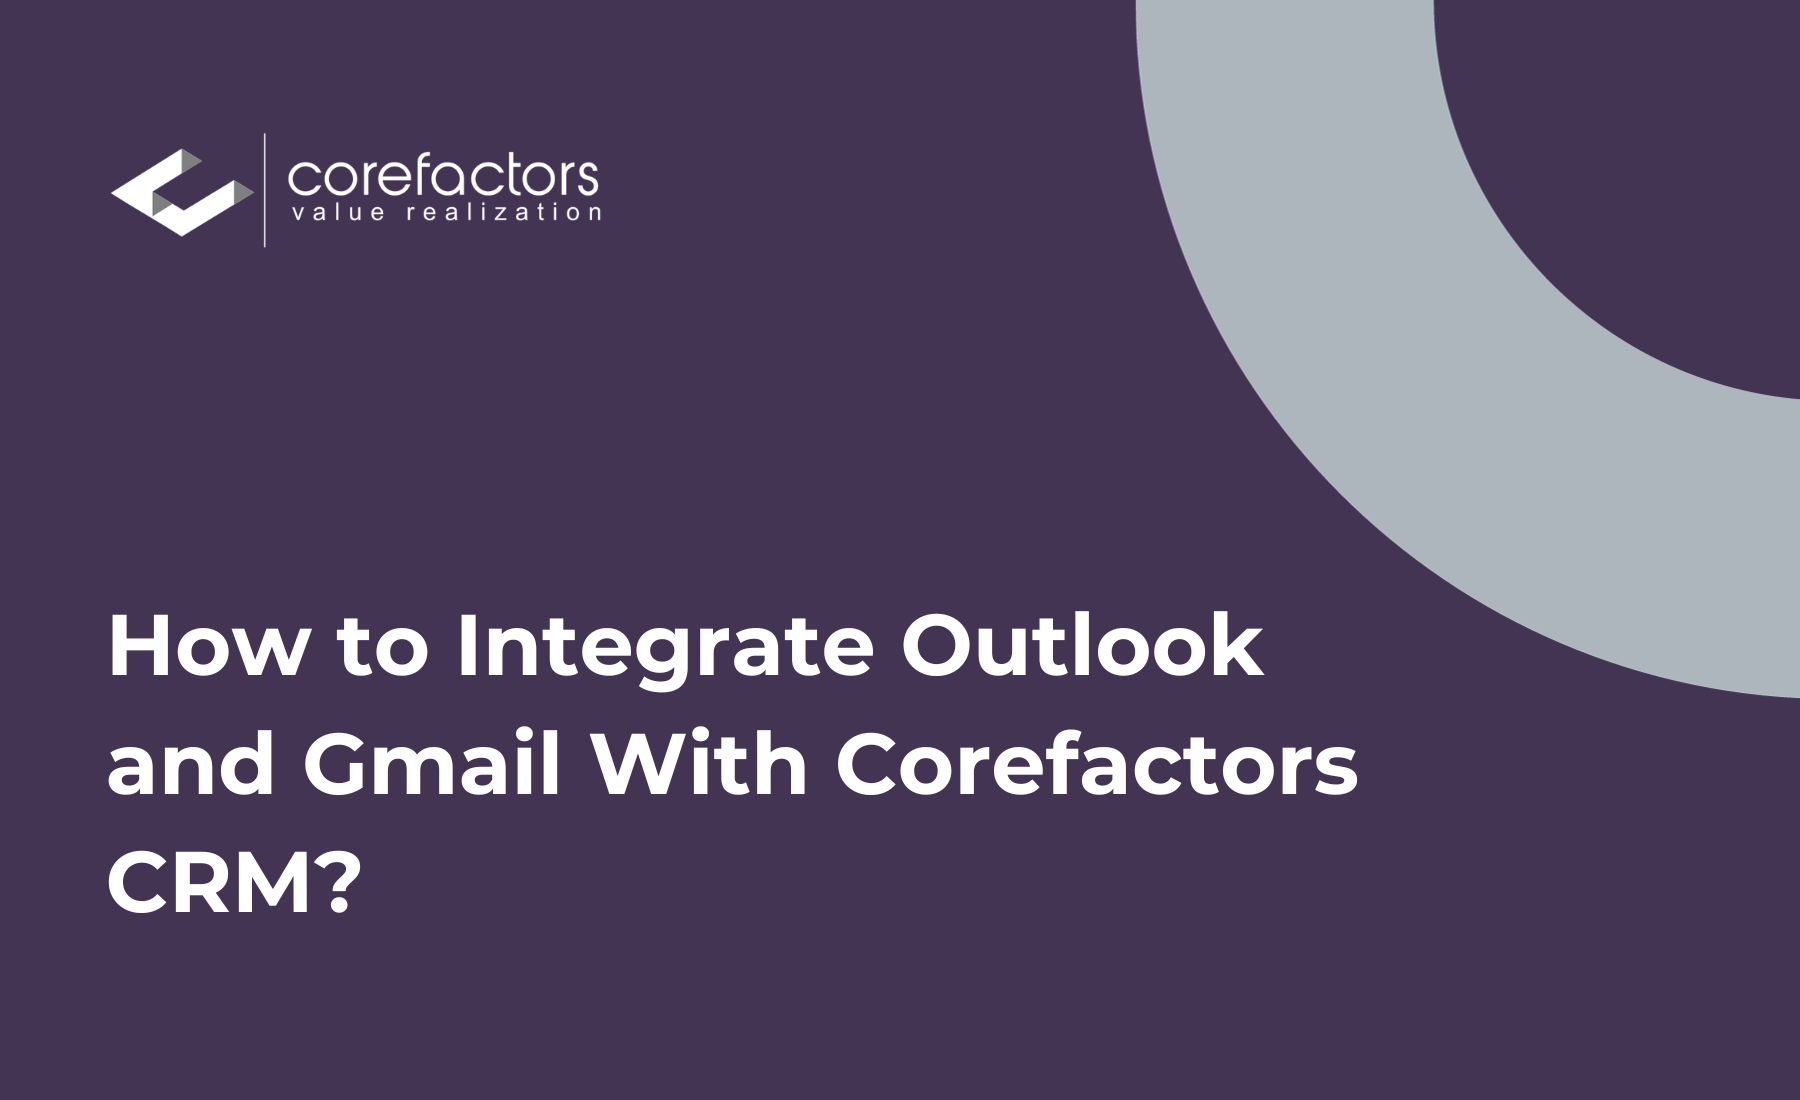 How to integrate your Email ID with Corefactors CRM?